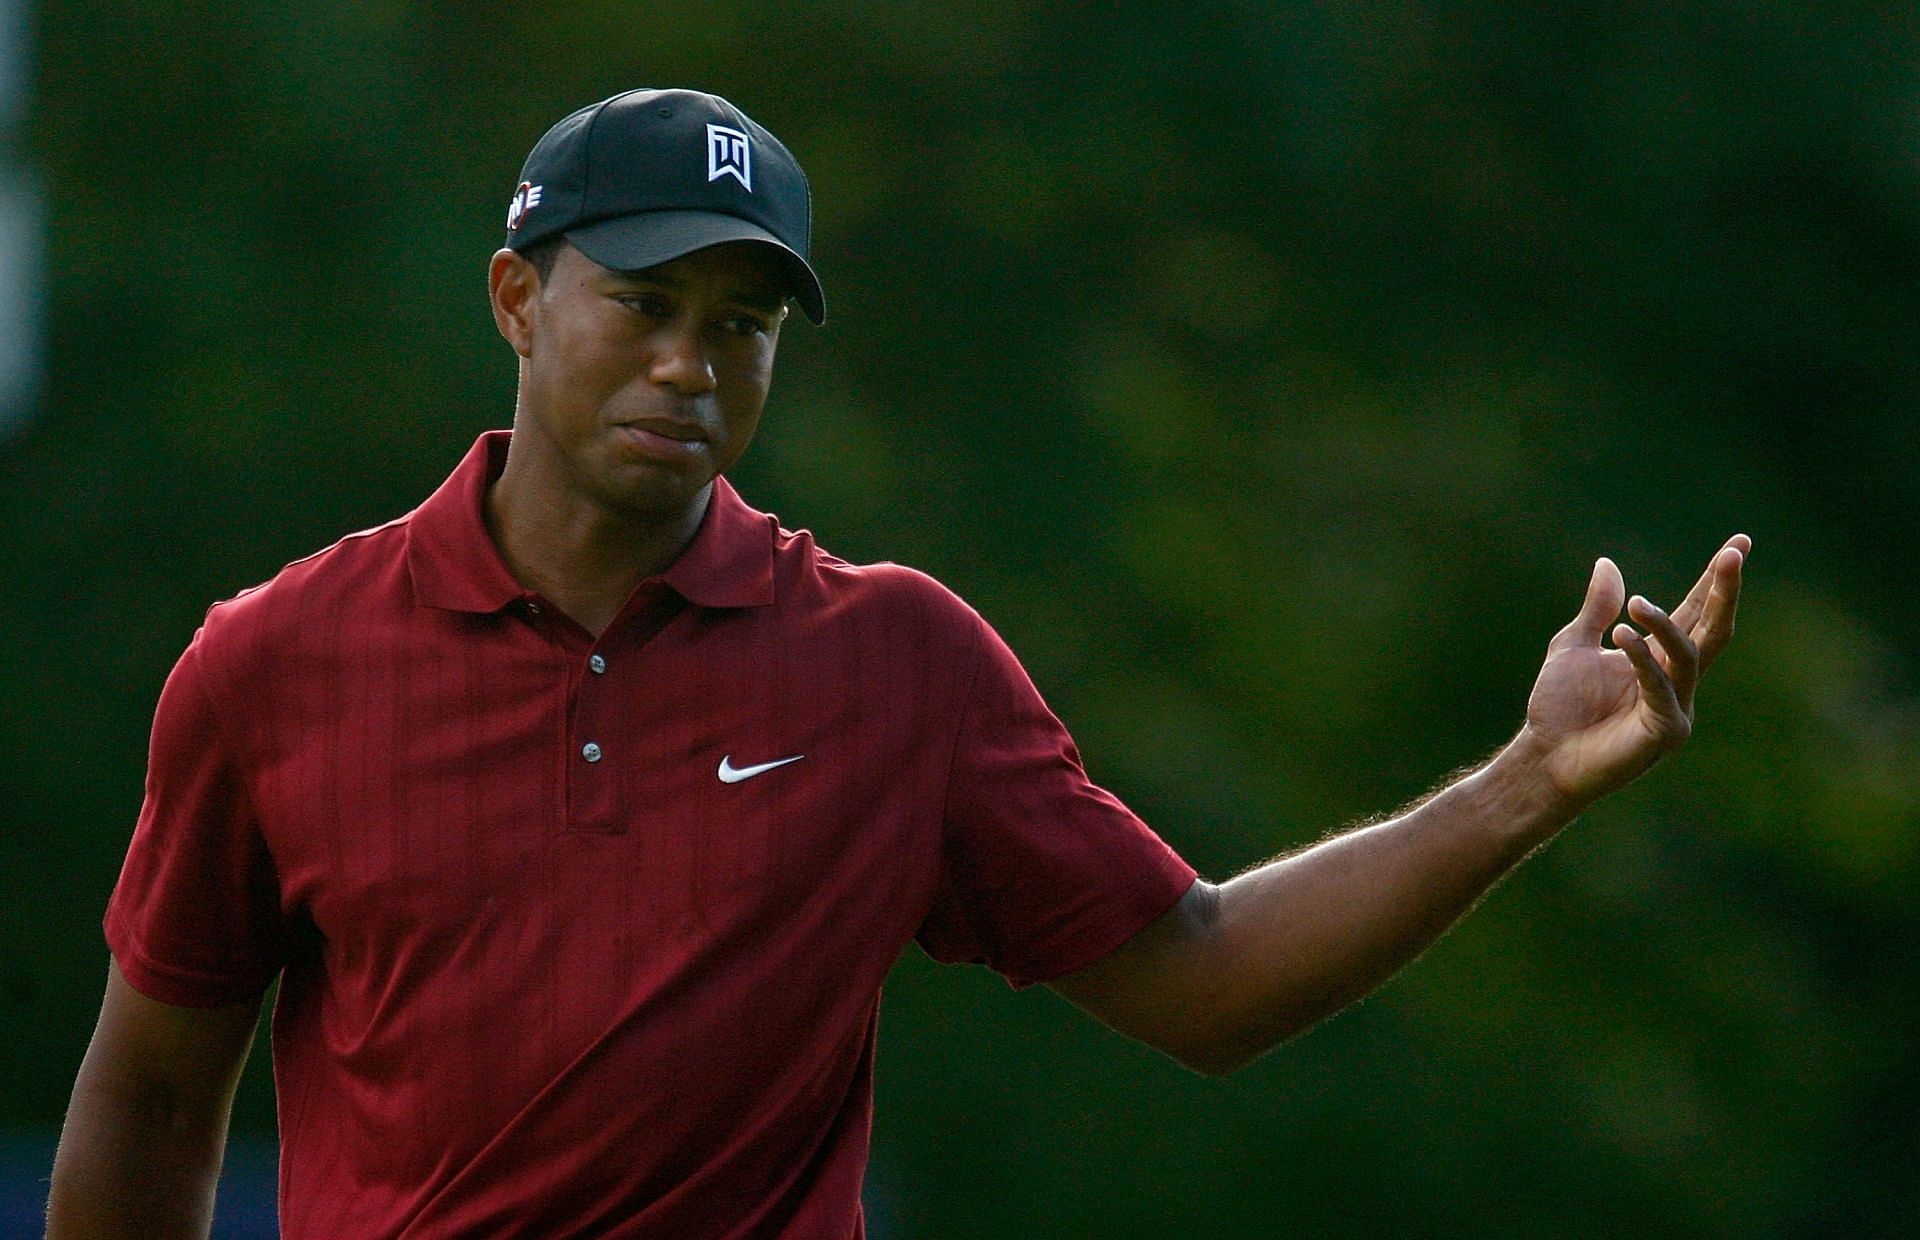 Tiger Woods at the 2009 Tour Championship